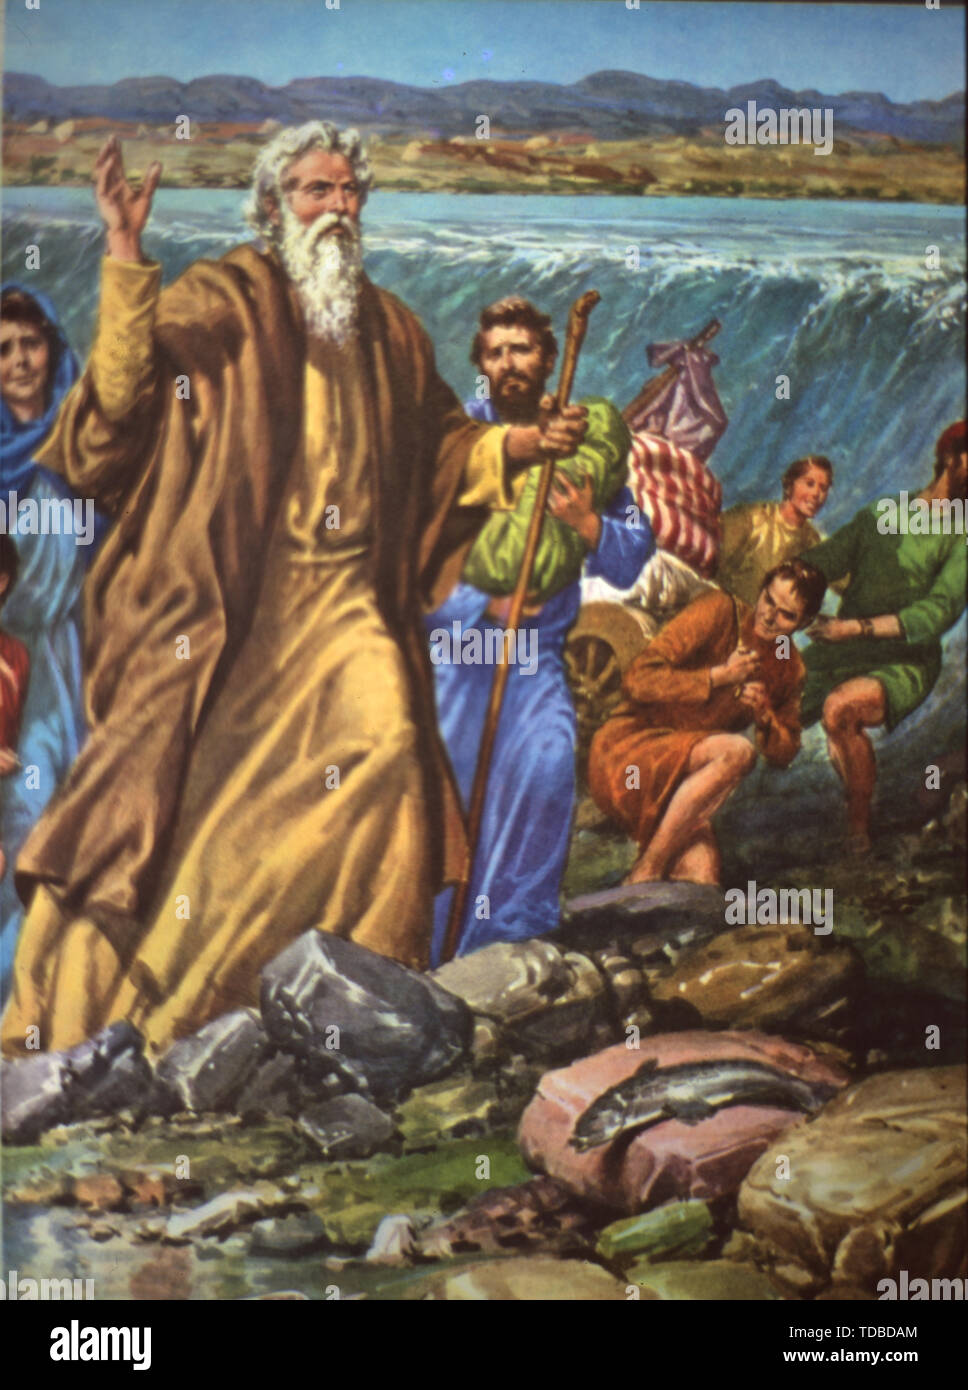 Illustration From The Bible Depicting Exodus 14 21 Moses Crossing The Red Sea Stock Photo Alamy